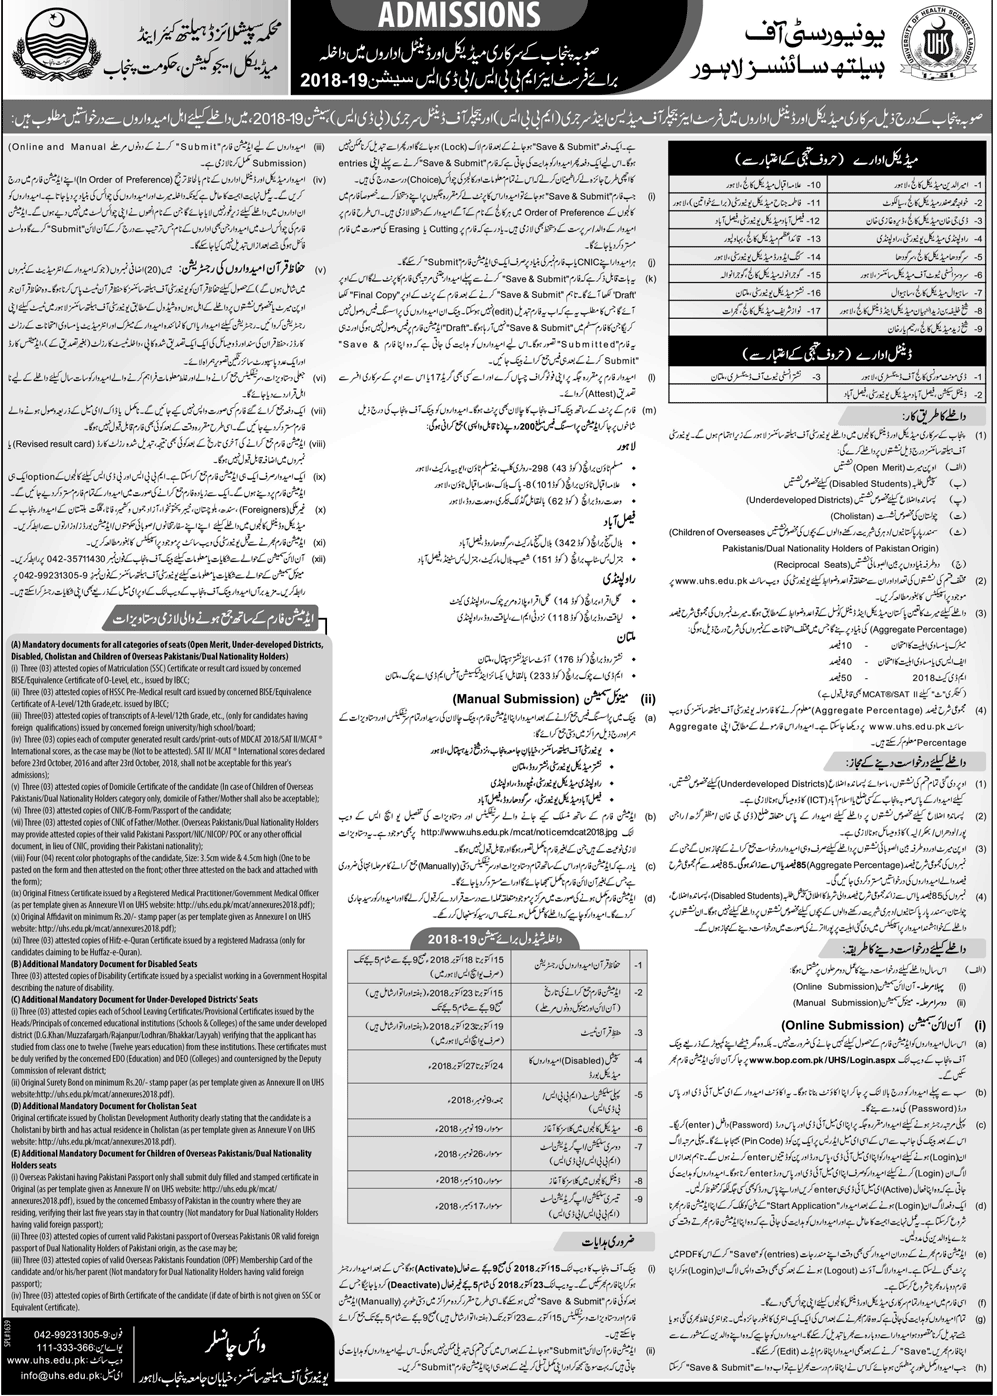 UHS Lahore MBBS & BDS Admission 2018 in Govt Medical Colleges